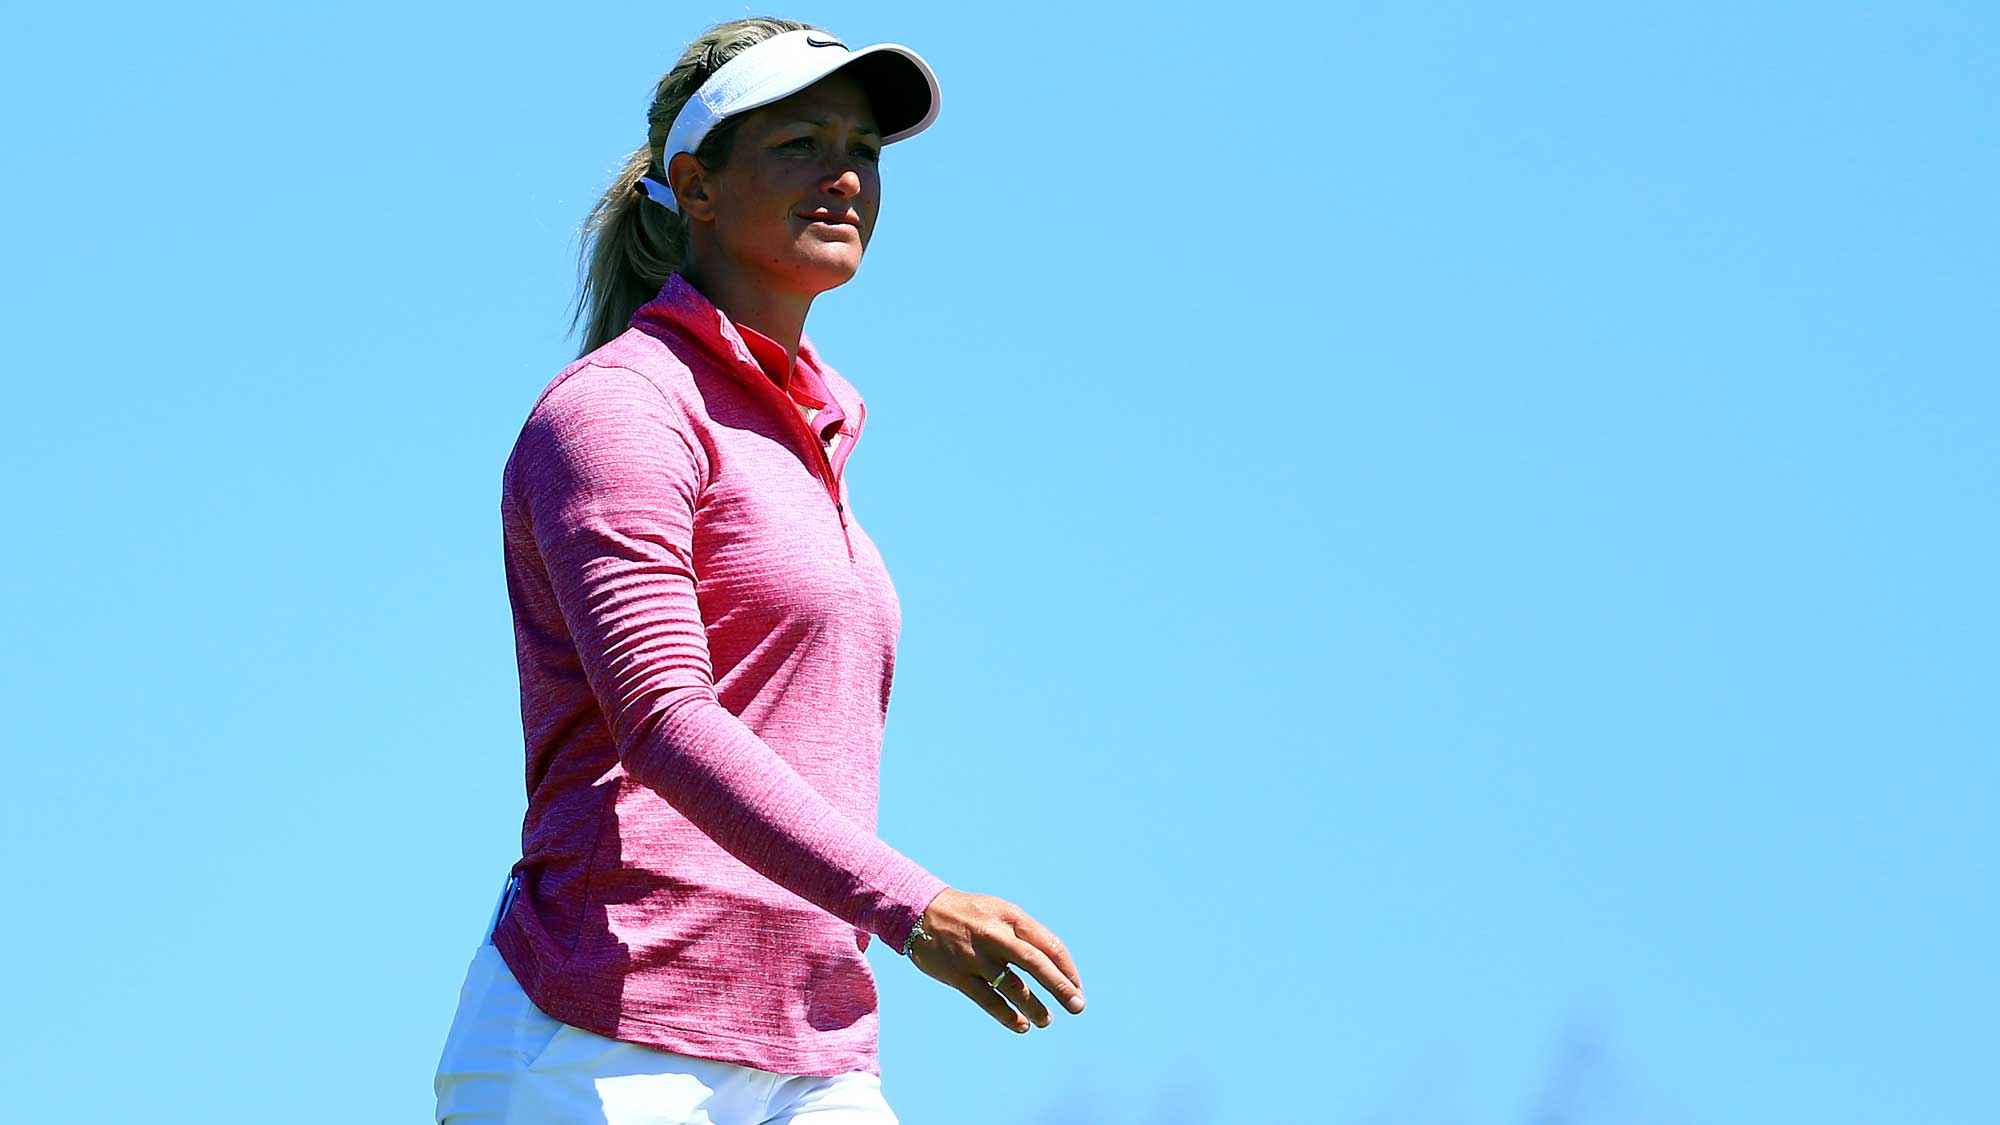 Suzann Pettersen of Norway walks down the 13th fairway during the first round of the Manulife LPGA Classic